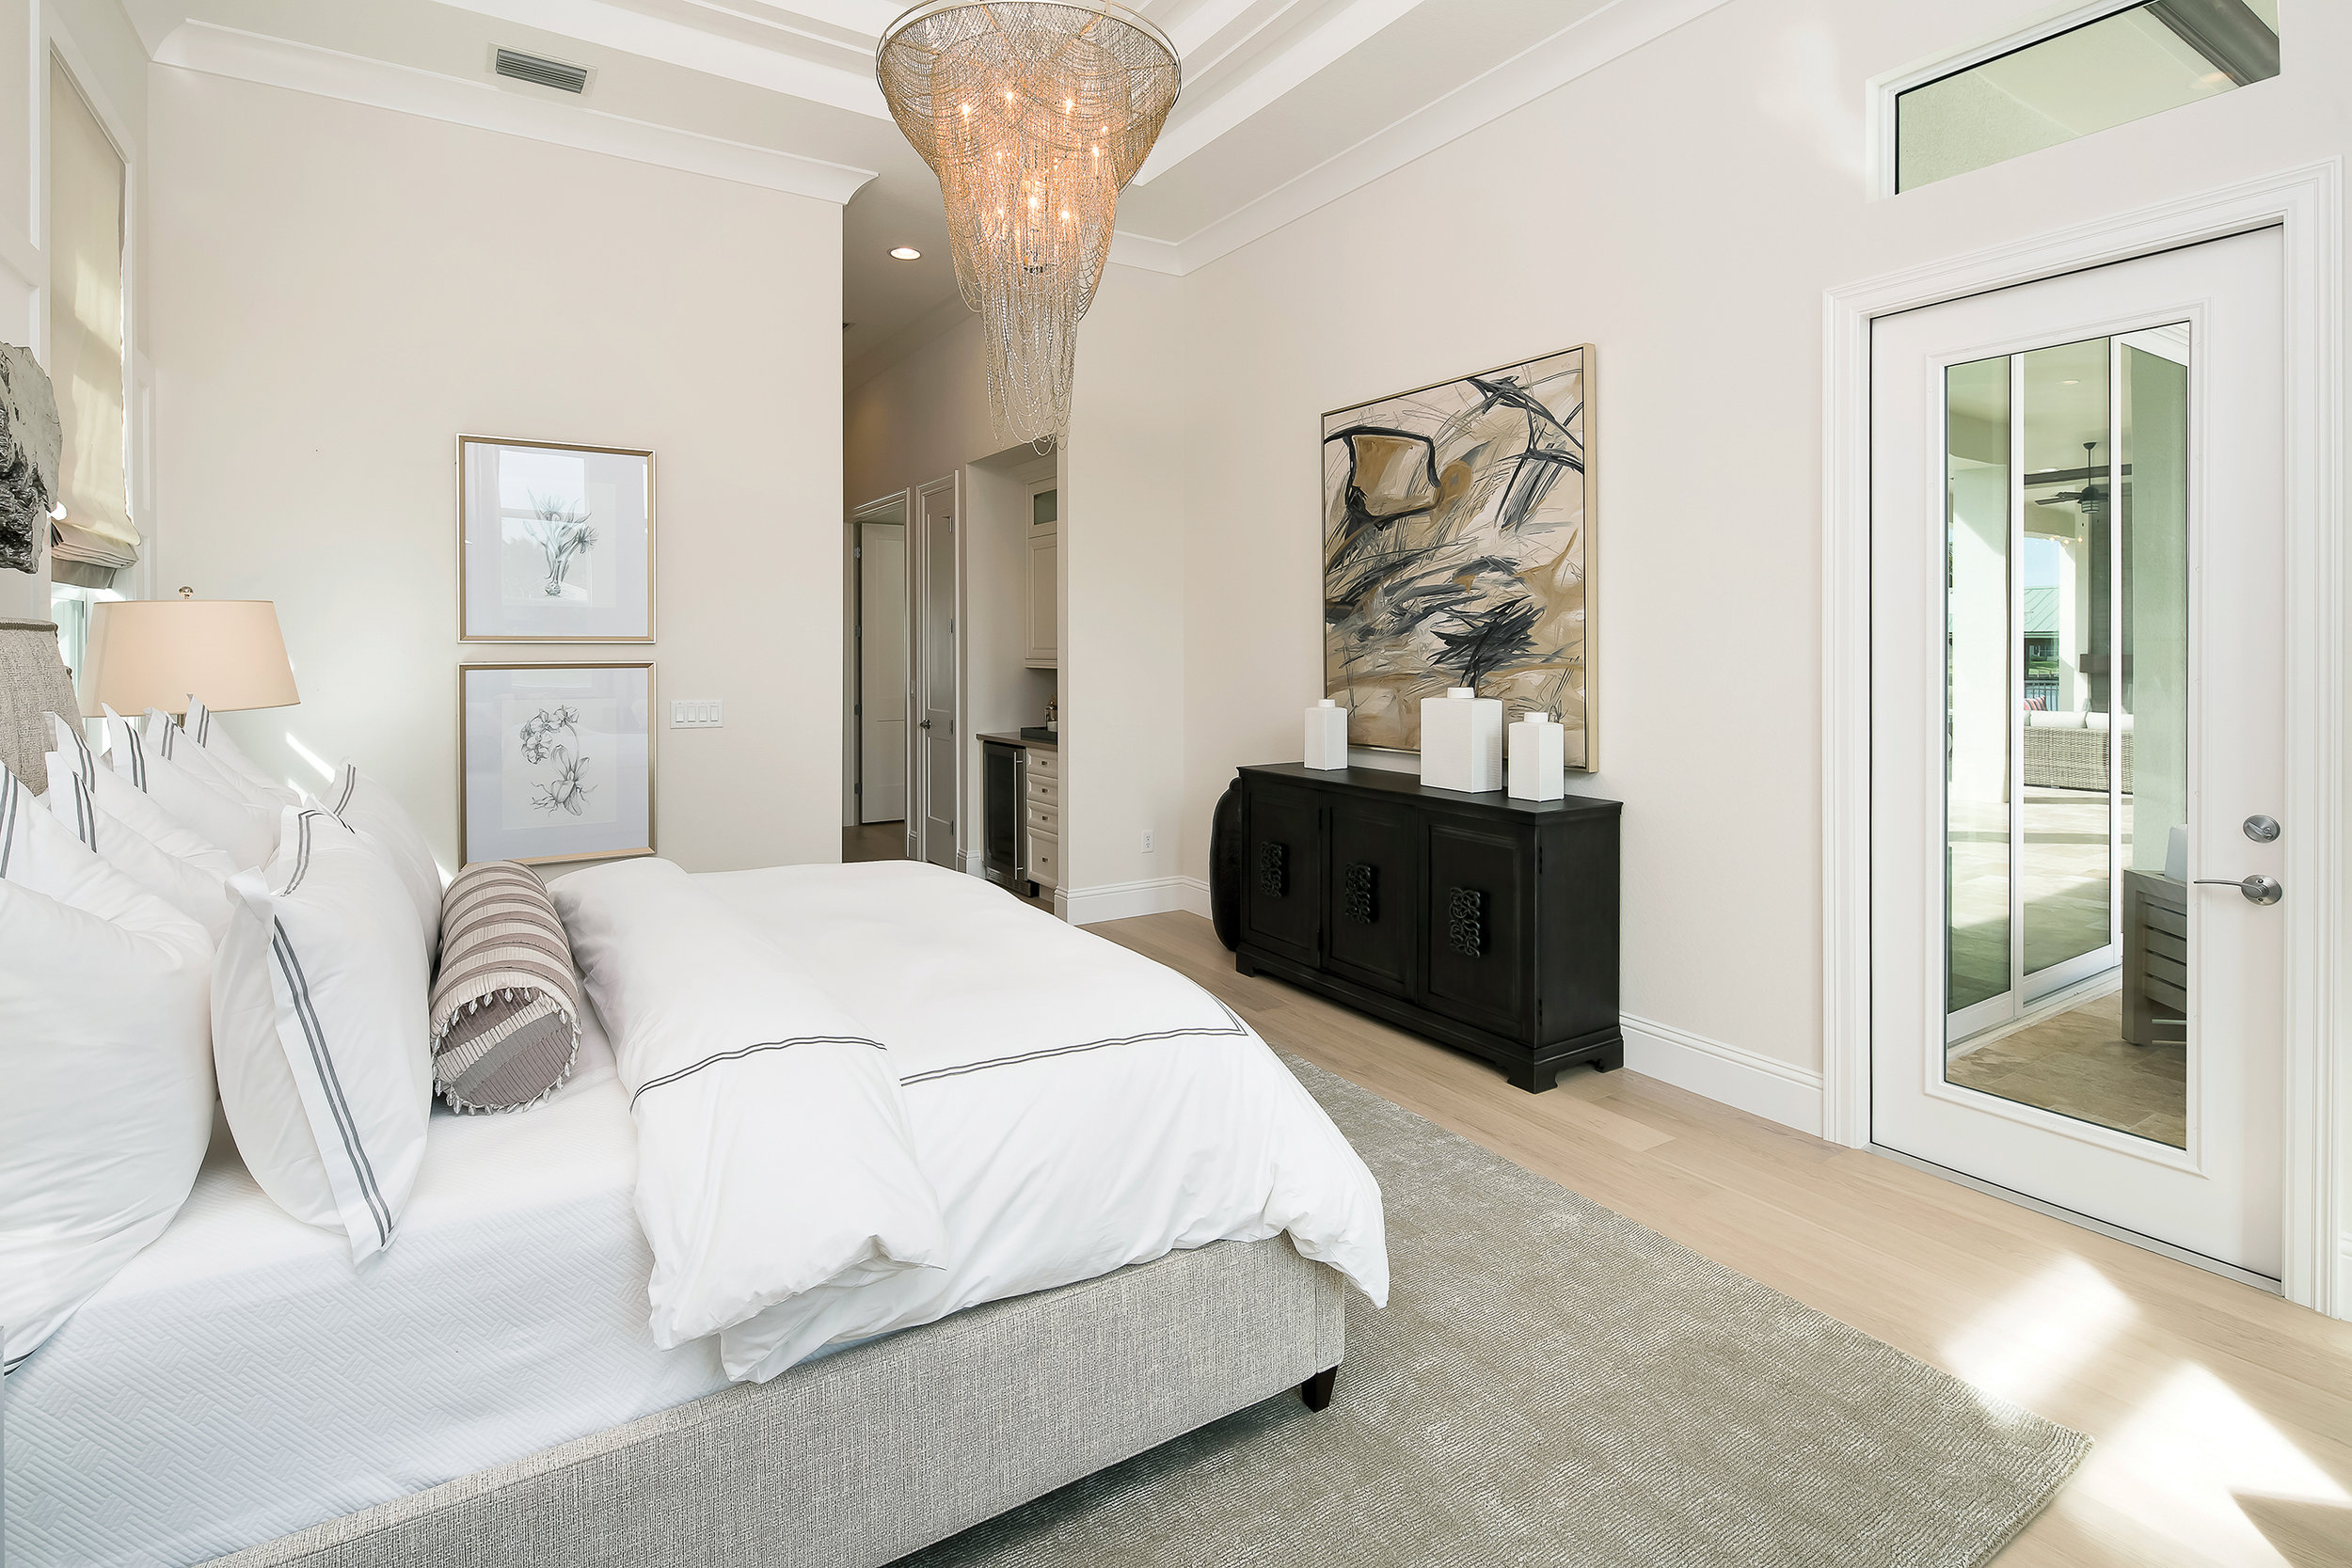  “The master bedroom was designed to be a true retreat and when people enter the space, it becomes one of the favorite rooms in the house. From the drink station to the placement of the bathroom and closets, this room is so well-planned out and priva